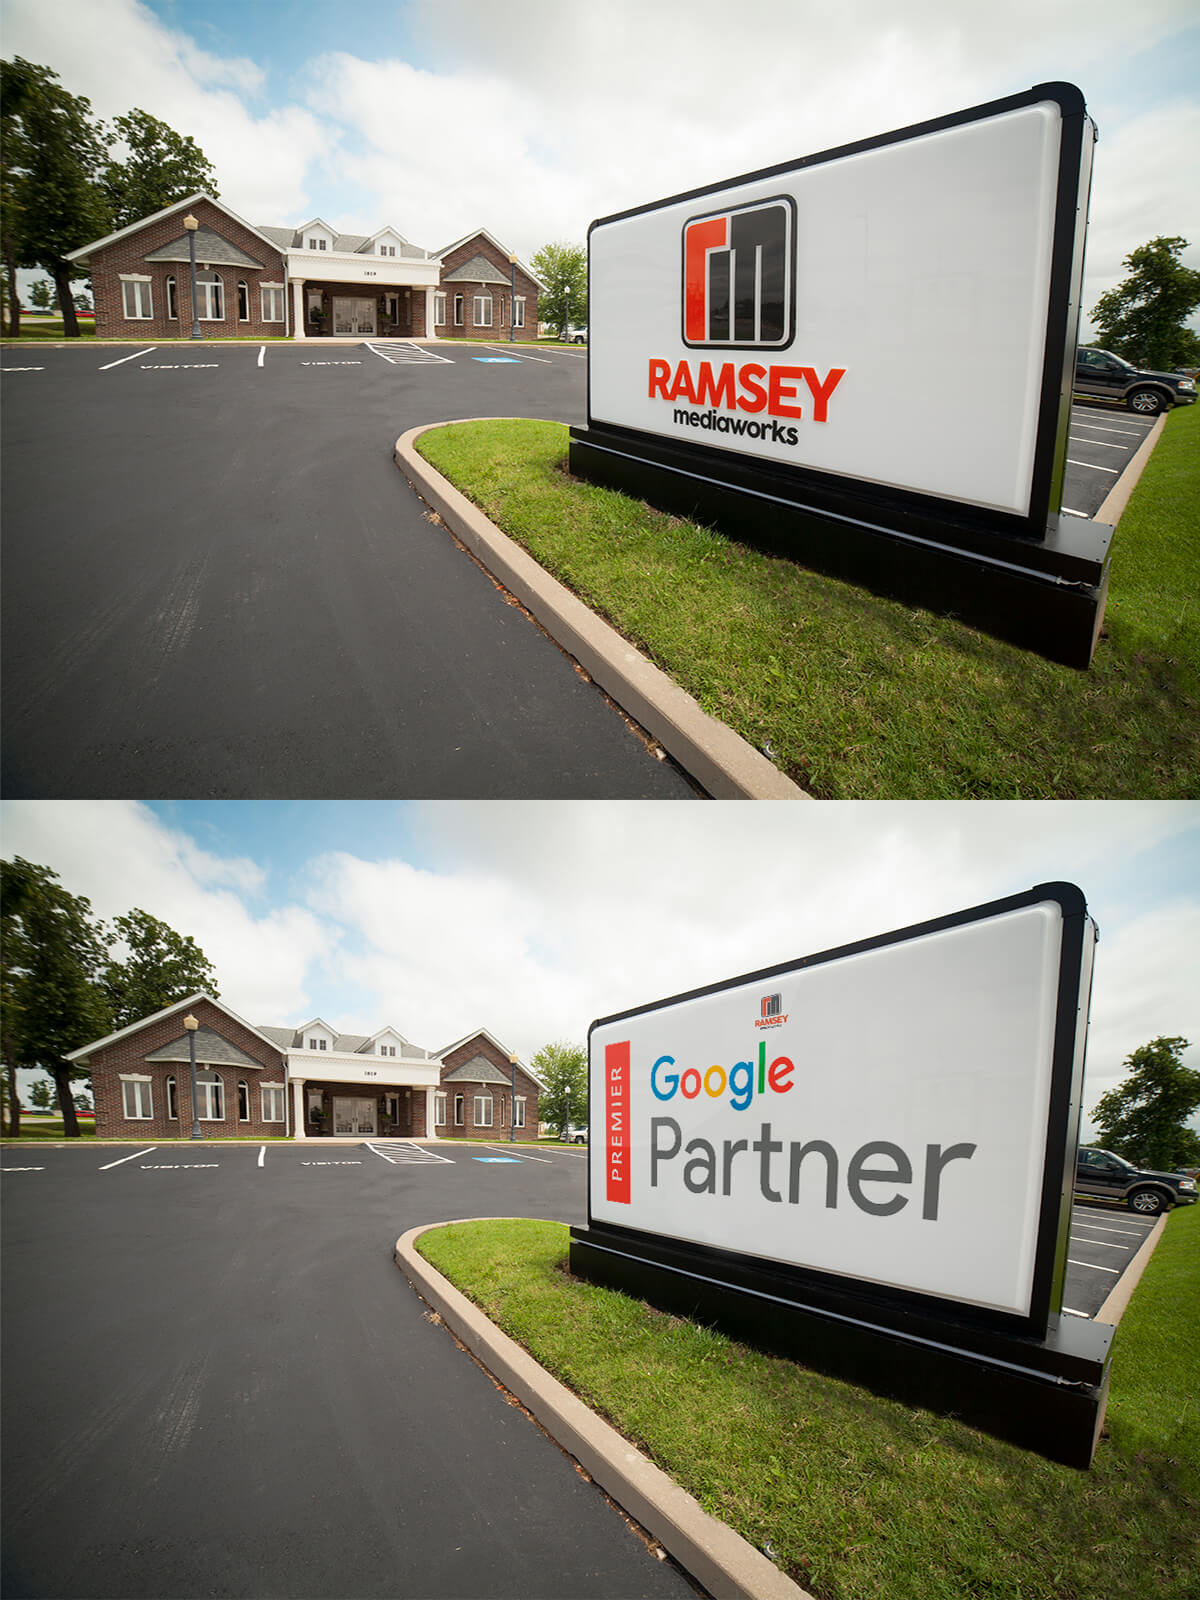 Ramsey MediaWorks road sign replaced with a Google Premier Partner road sign.